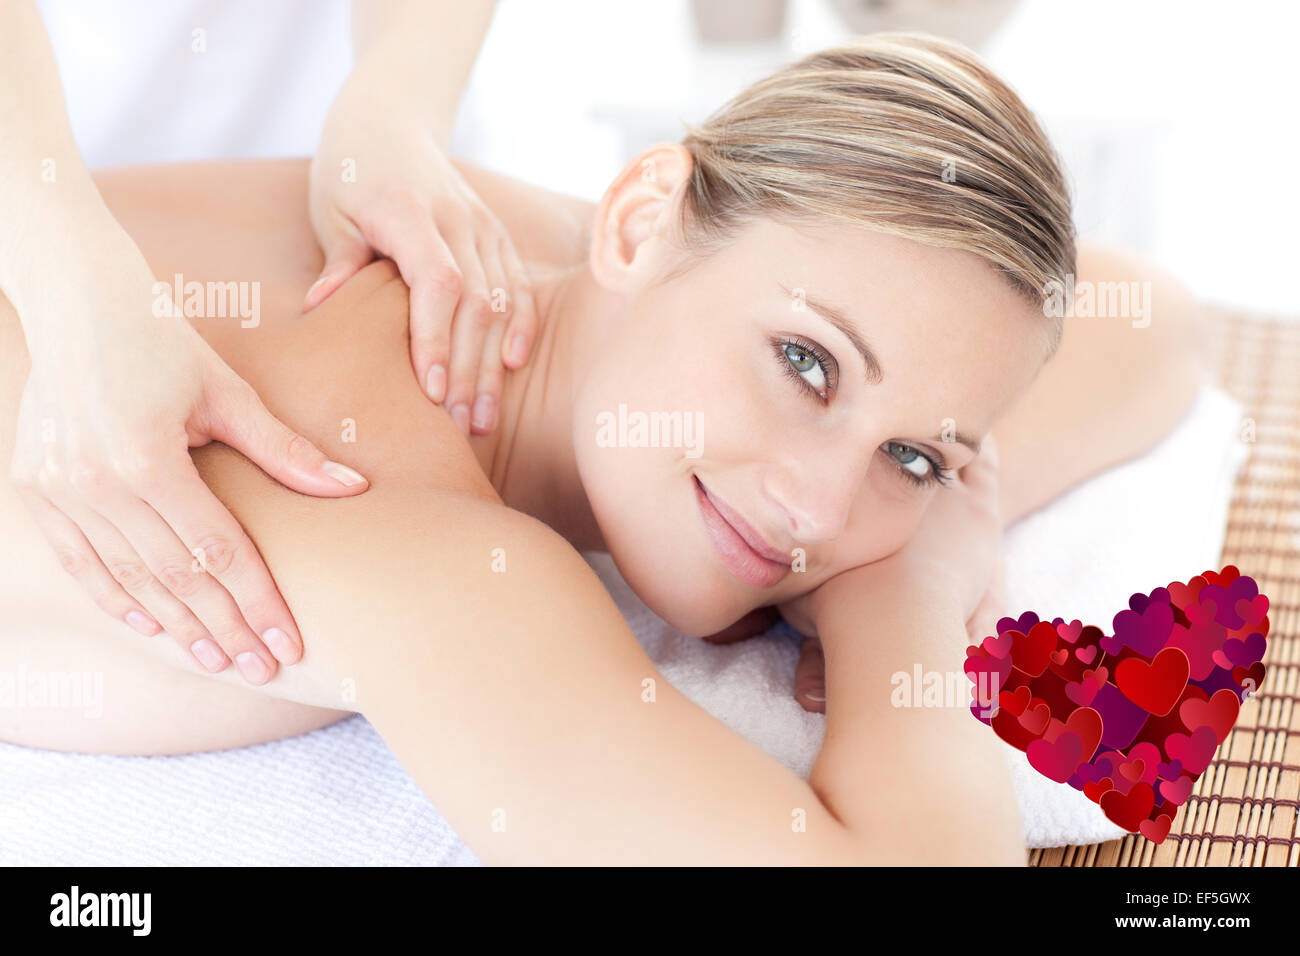 Composite image of smiling woman receiving a back massage Stock Photo